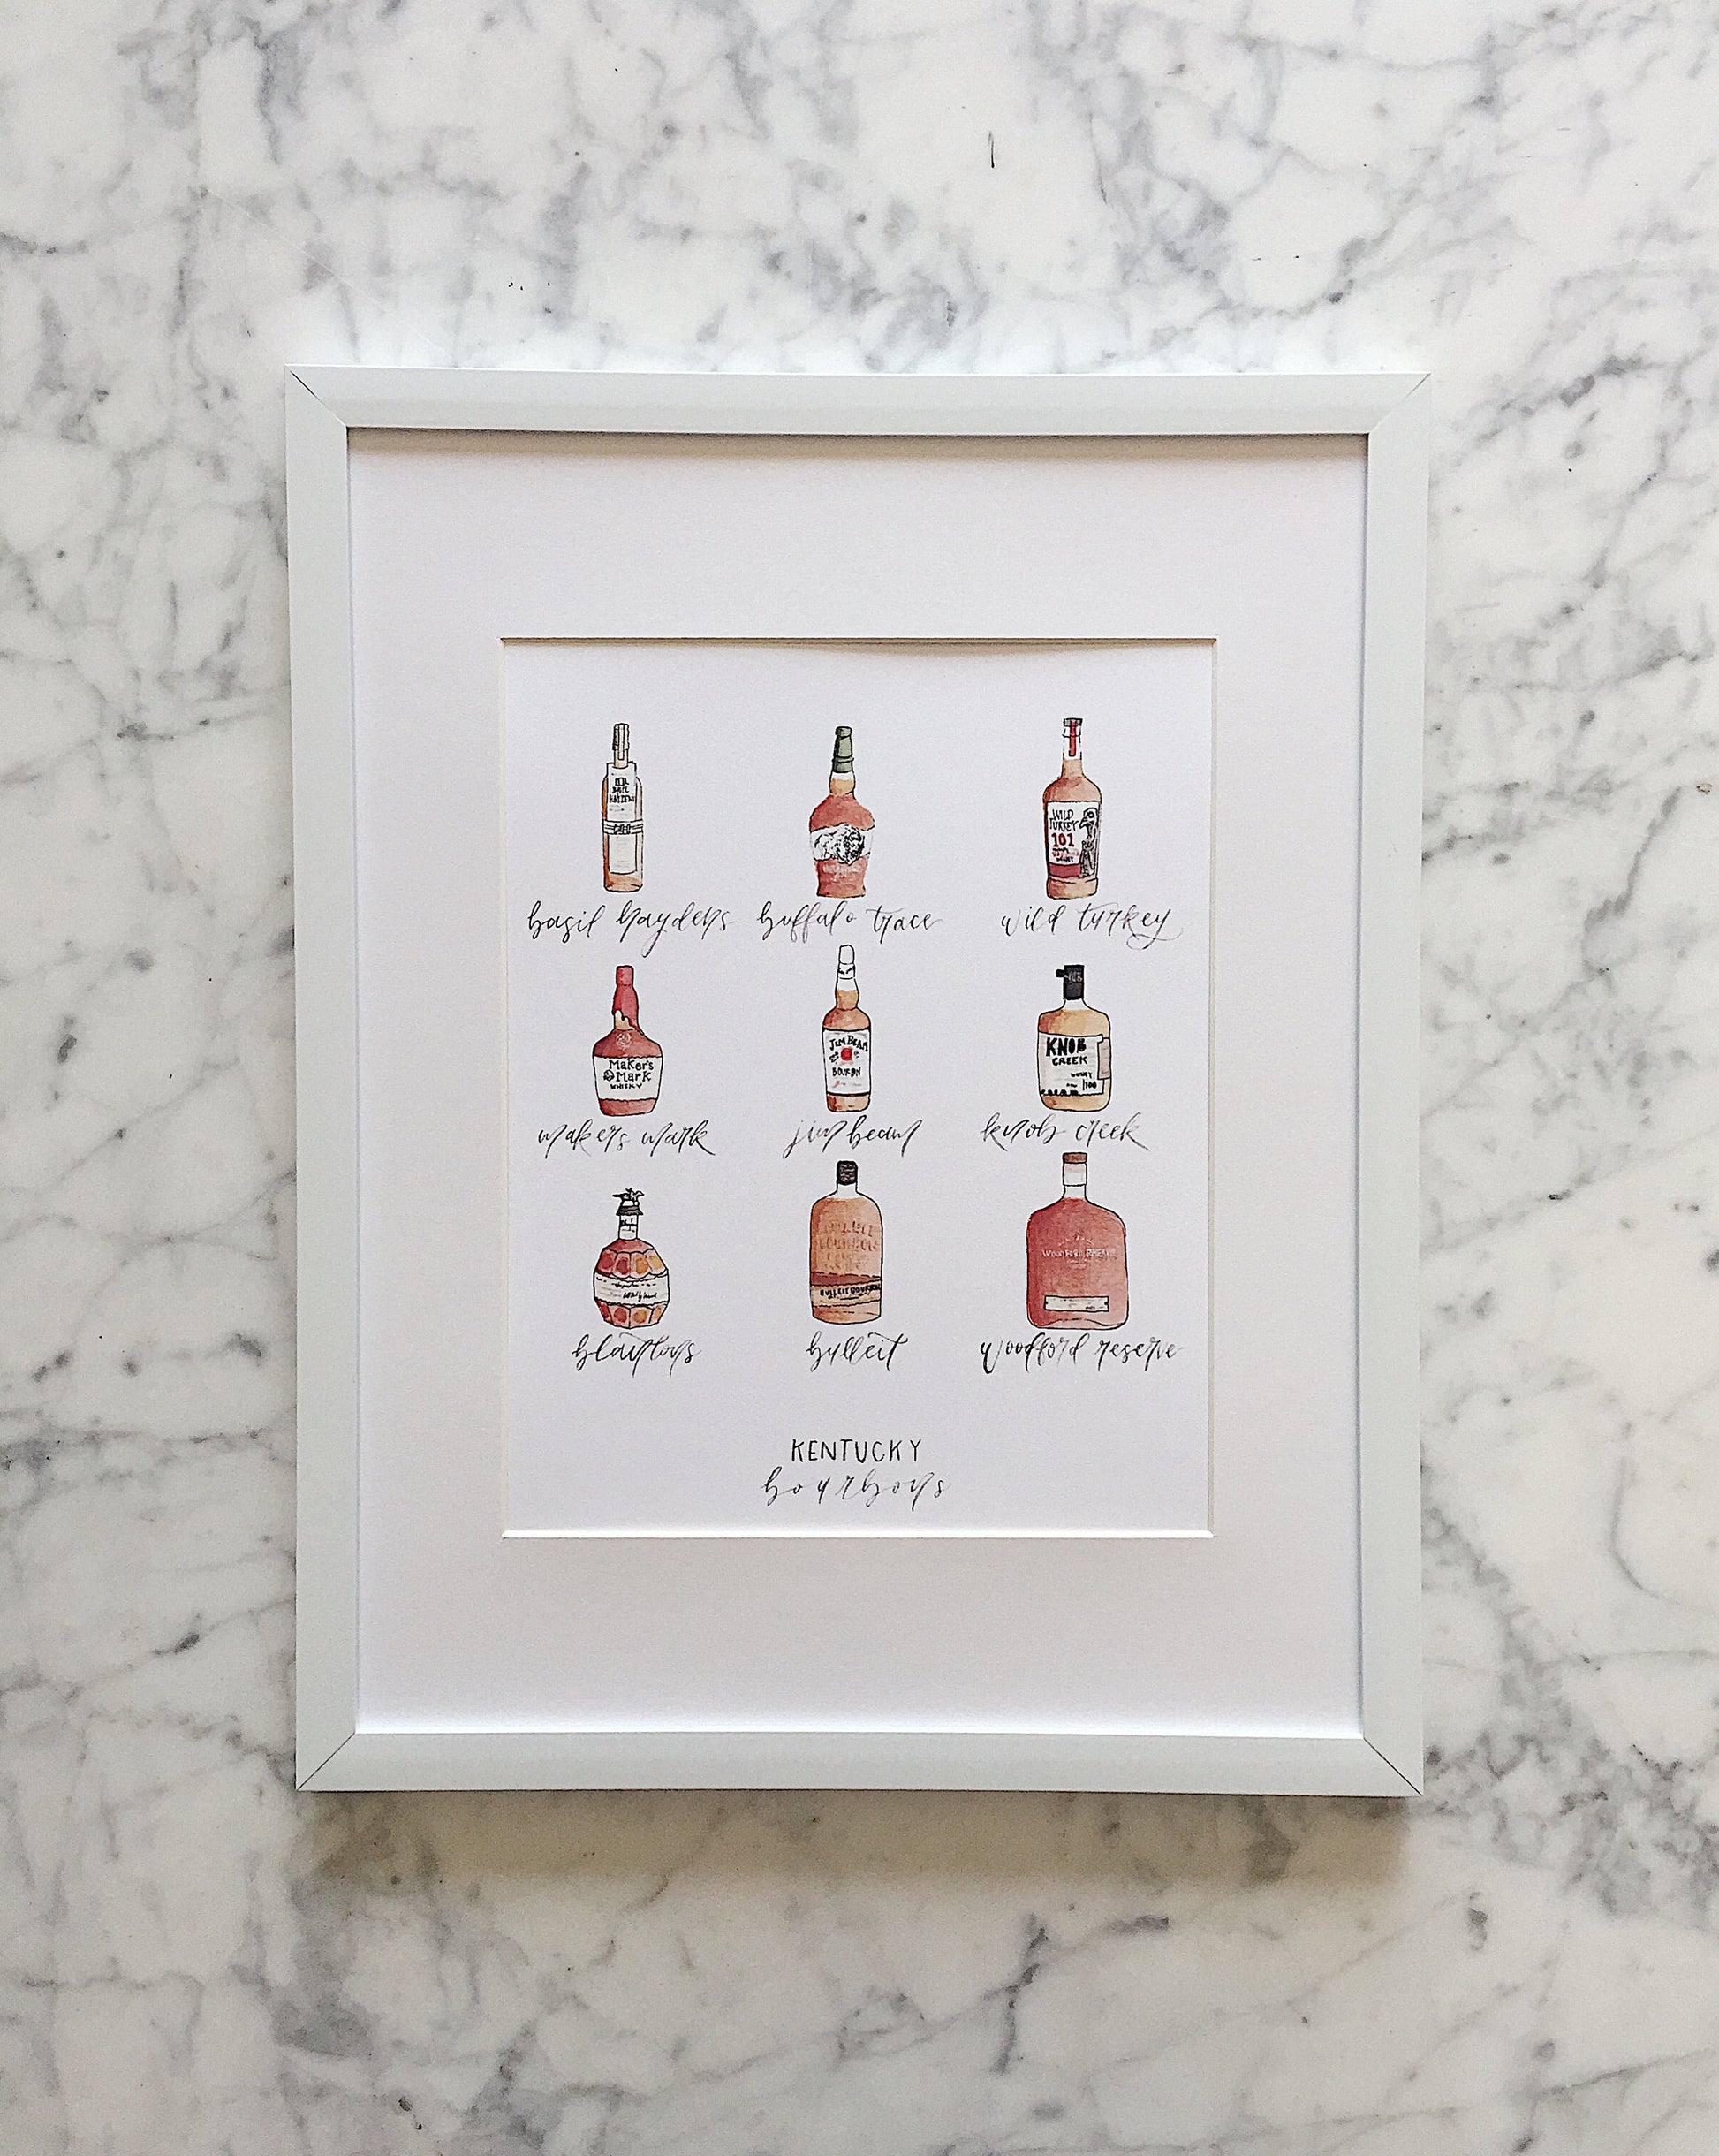 A watercolor art print that displays a variety of popular Kentucky Bourbons such as Basil Hayden, Buffalo Trace, Wild Turkey, Maker's Mark, Jim Beam, Knob Creek, Blanton's, Bulleit, and Woodford Reserve.